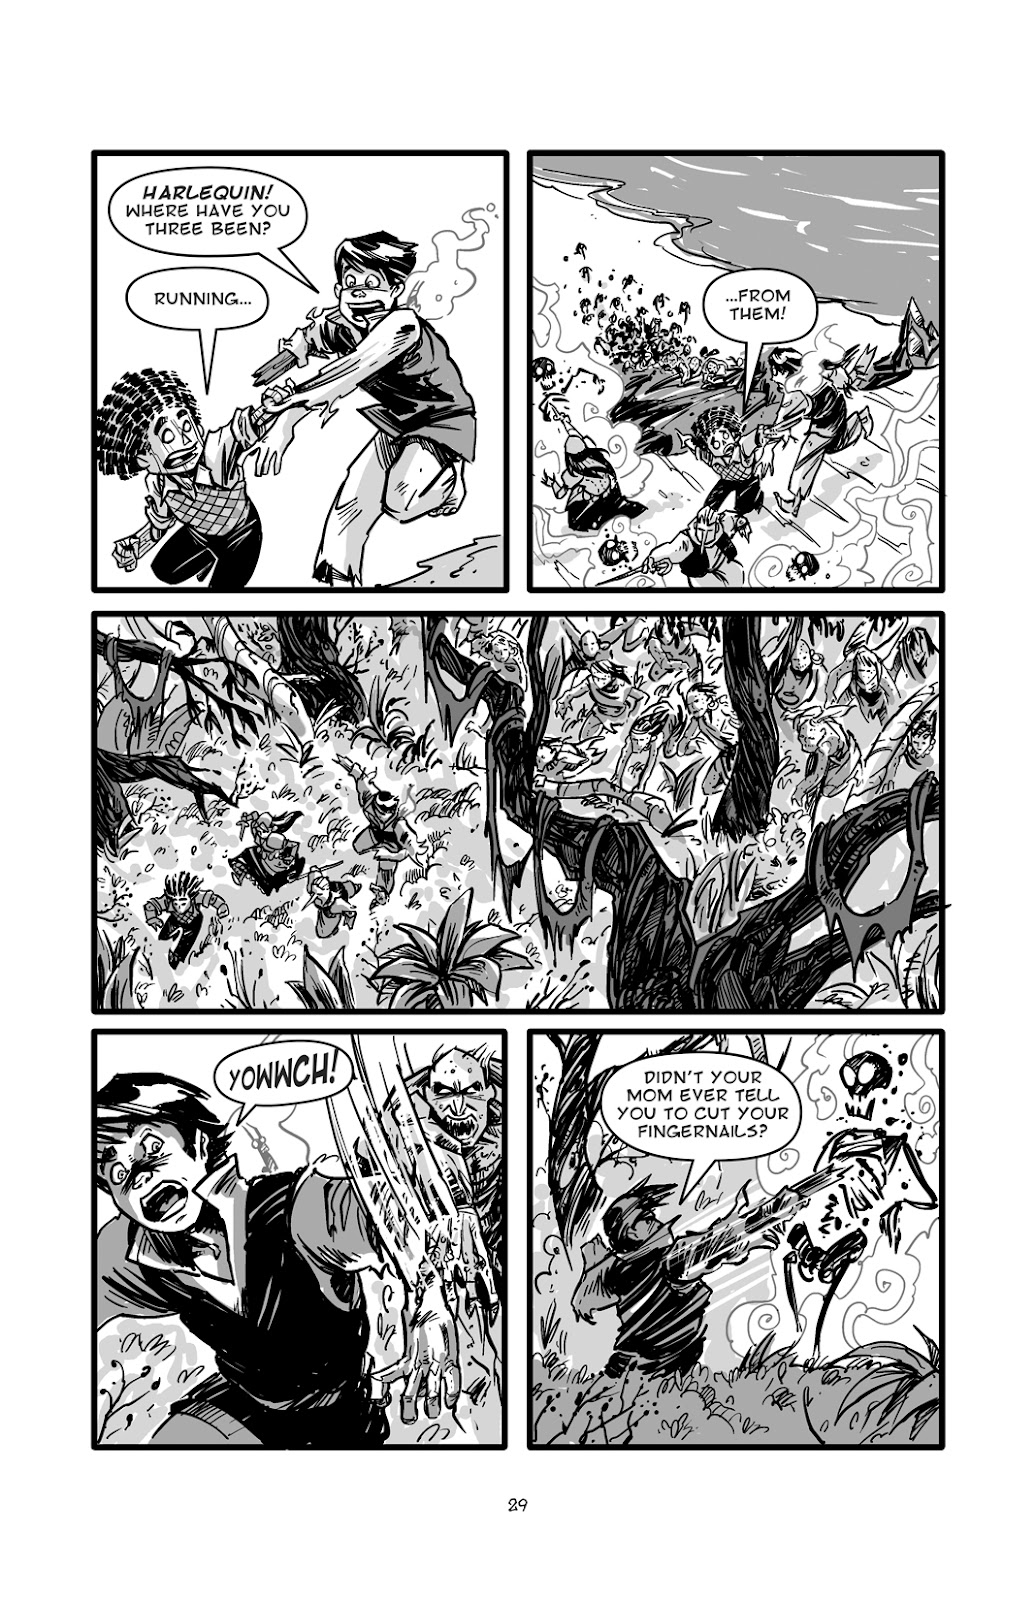 Pinocchio: Vampire Slayer - Of Wood and Blood issue 2 - Page 4